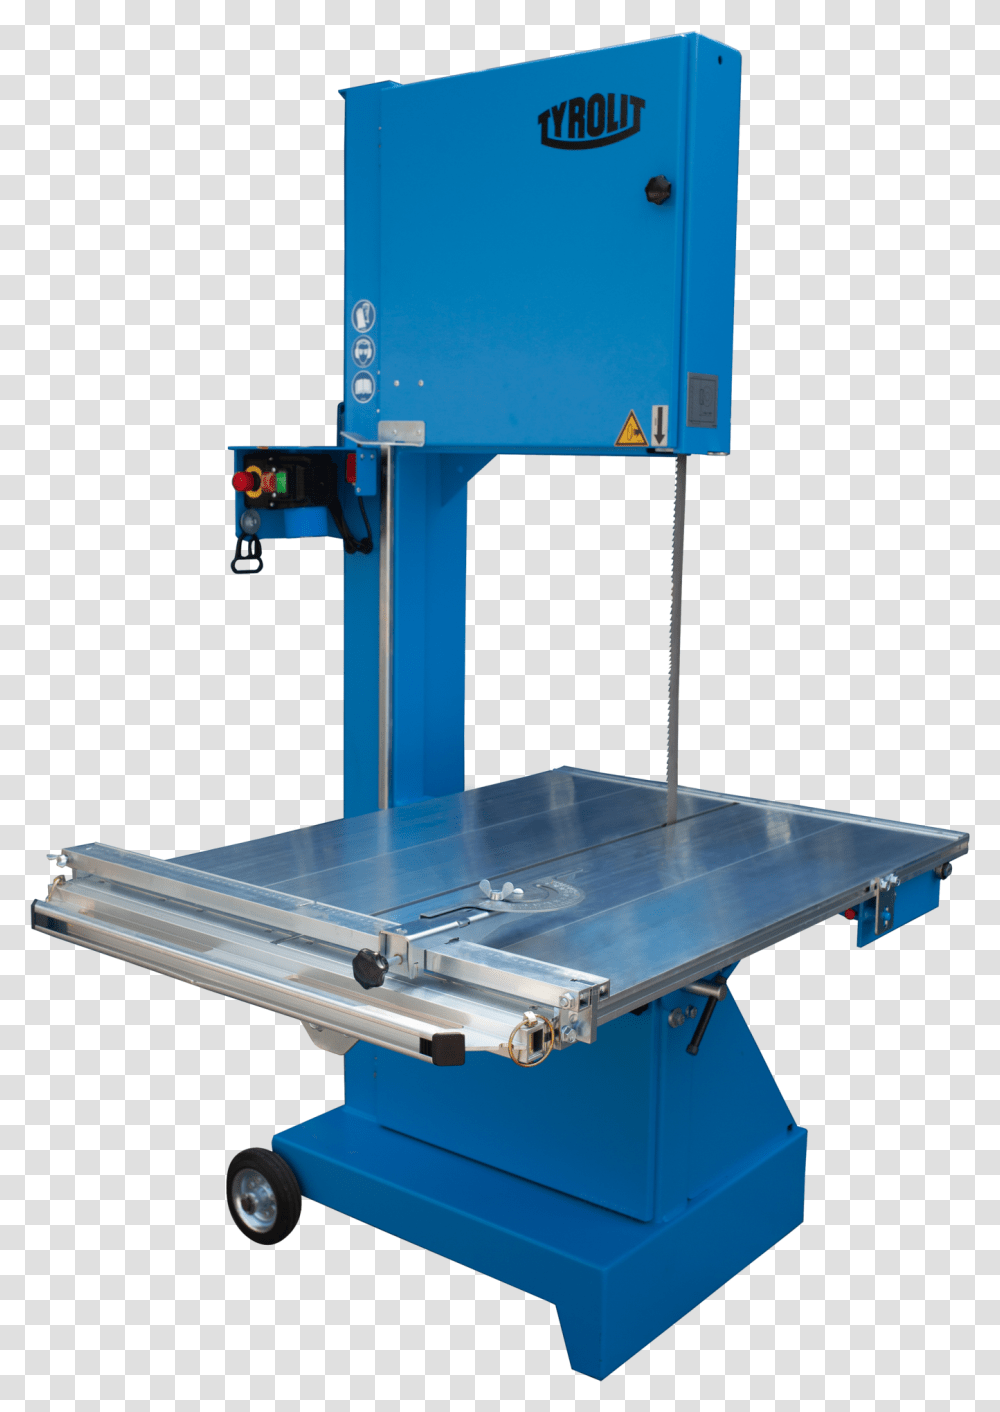 Band Saw Tyrolit Tbs510 Milling, Machine, Sink Faucet Transparent Png